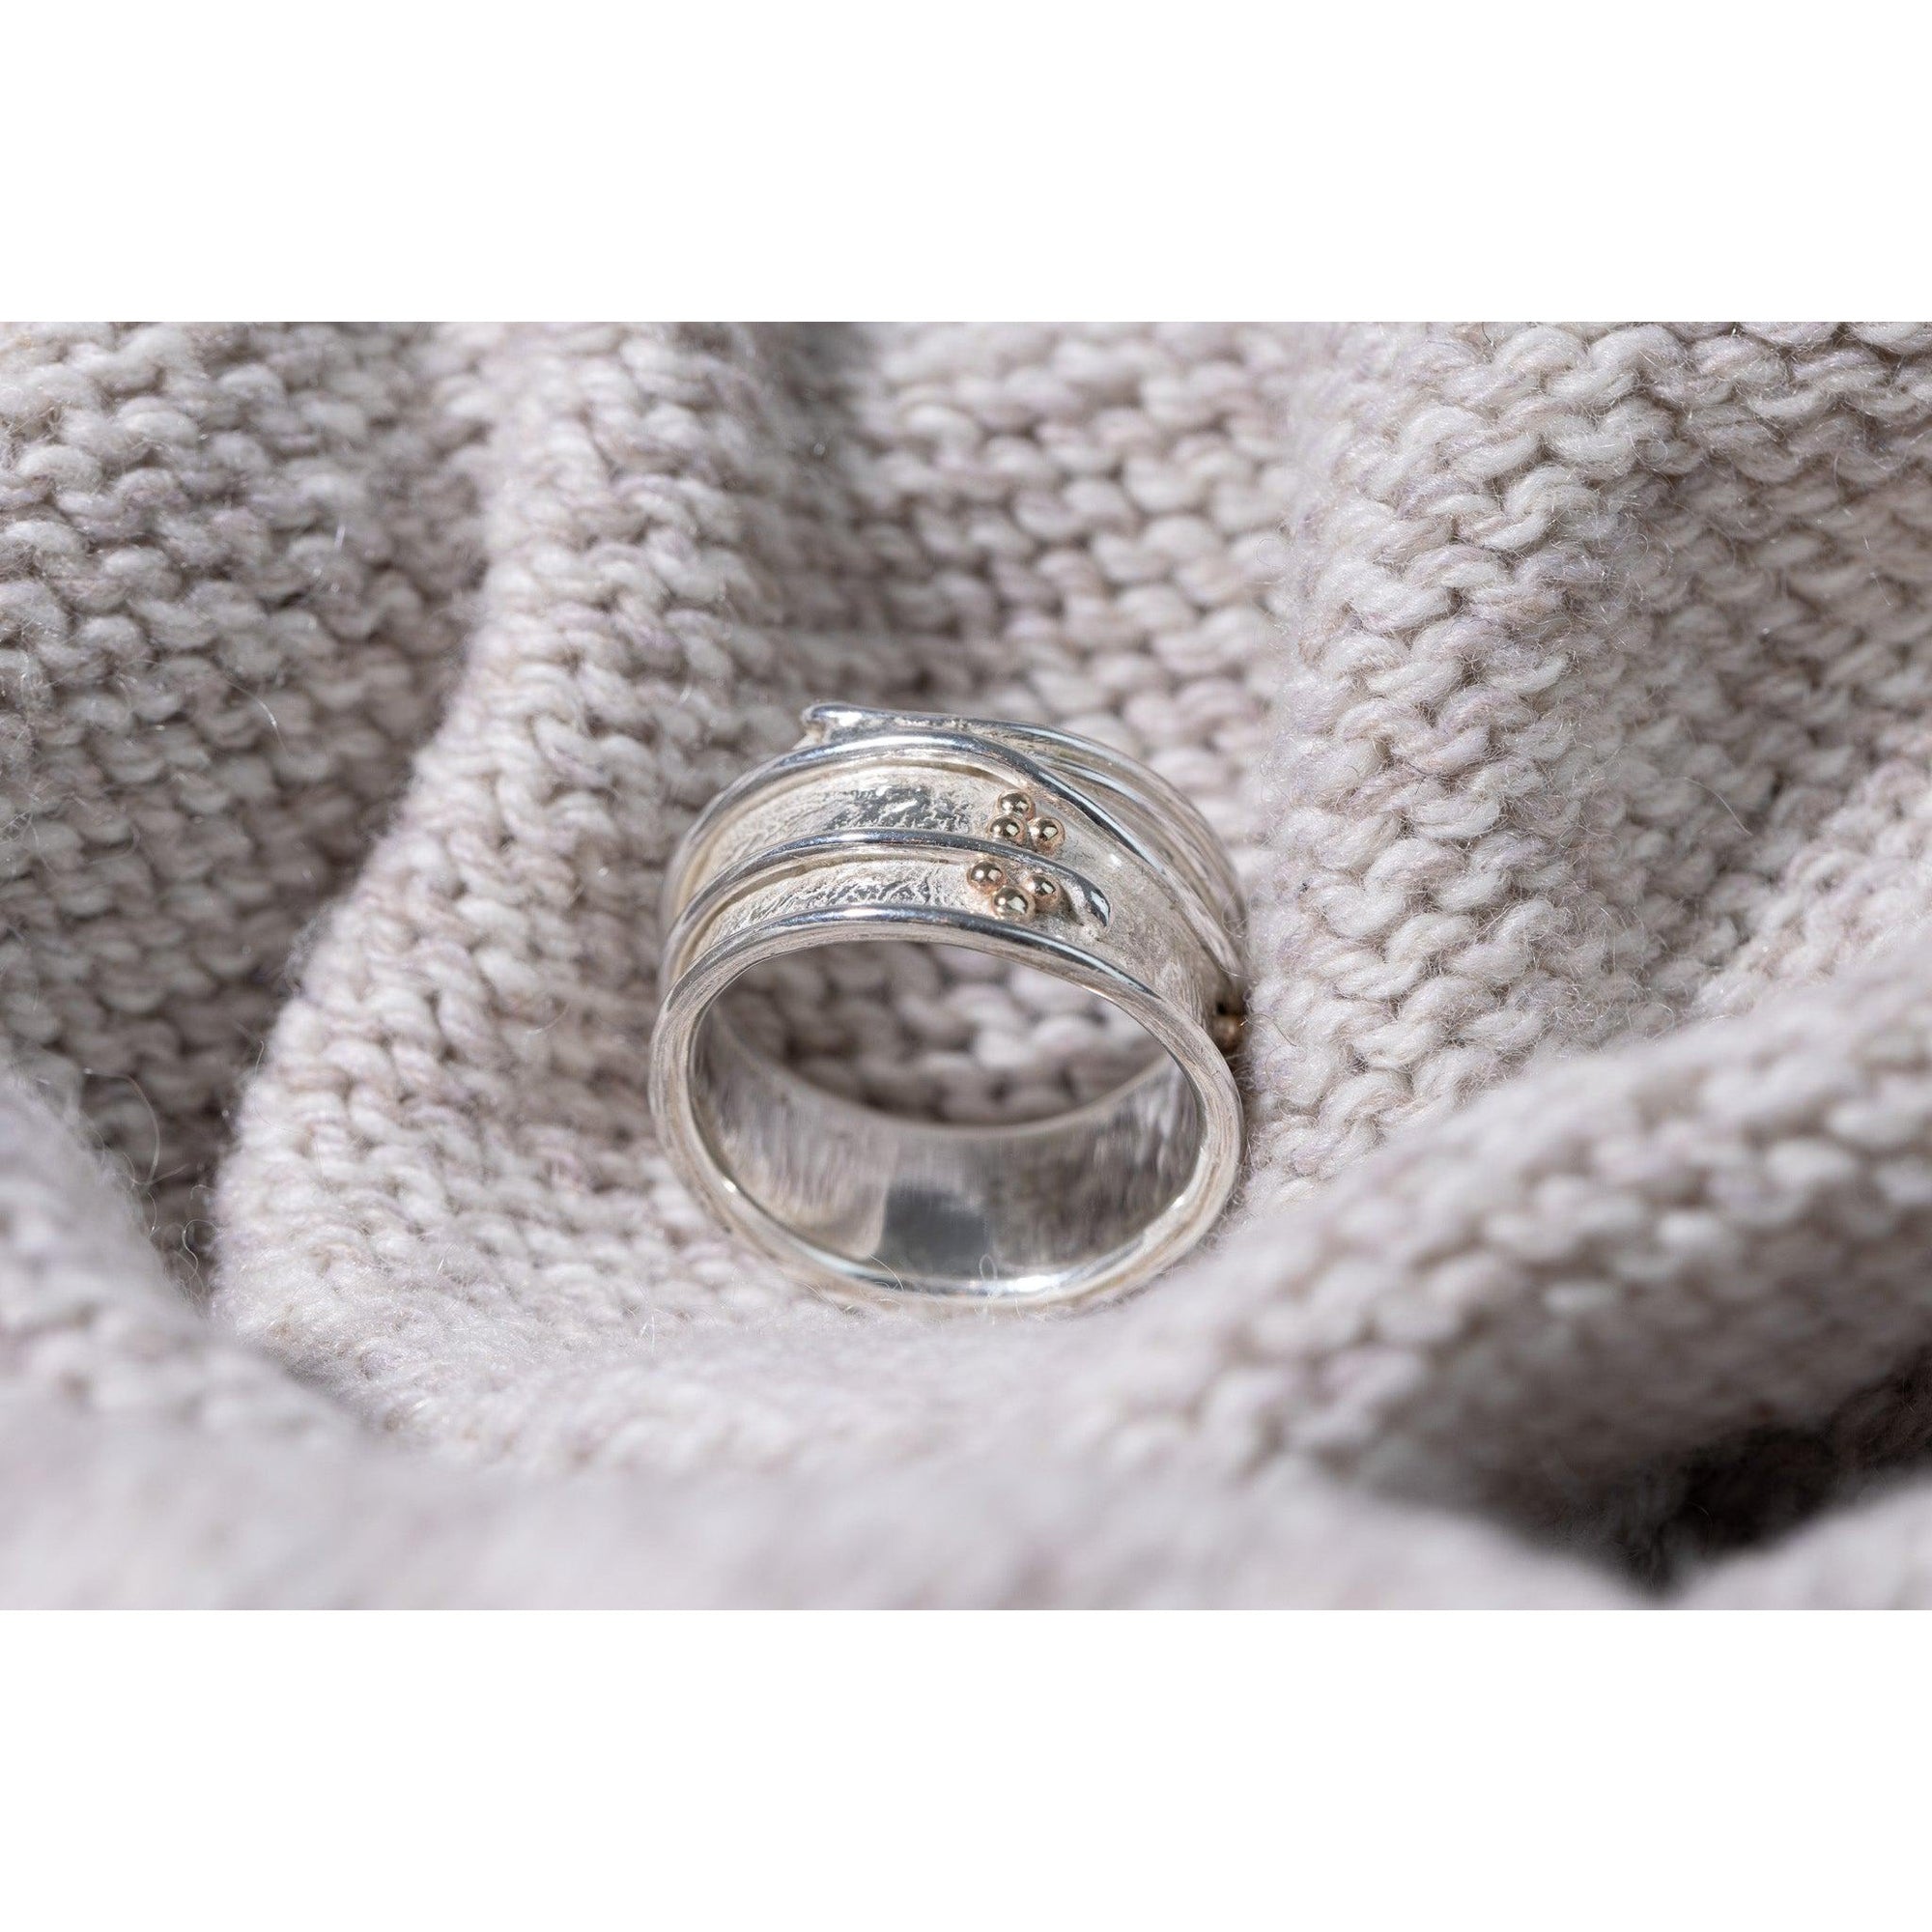 'LG53 - Wide Silver Ring with Gold Beads' by Les Grimshaw, available at Padstow Gallery, Cornwall